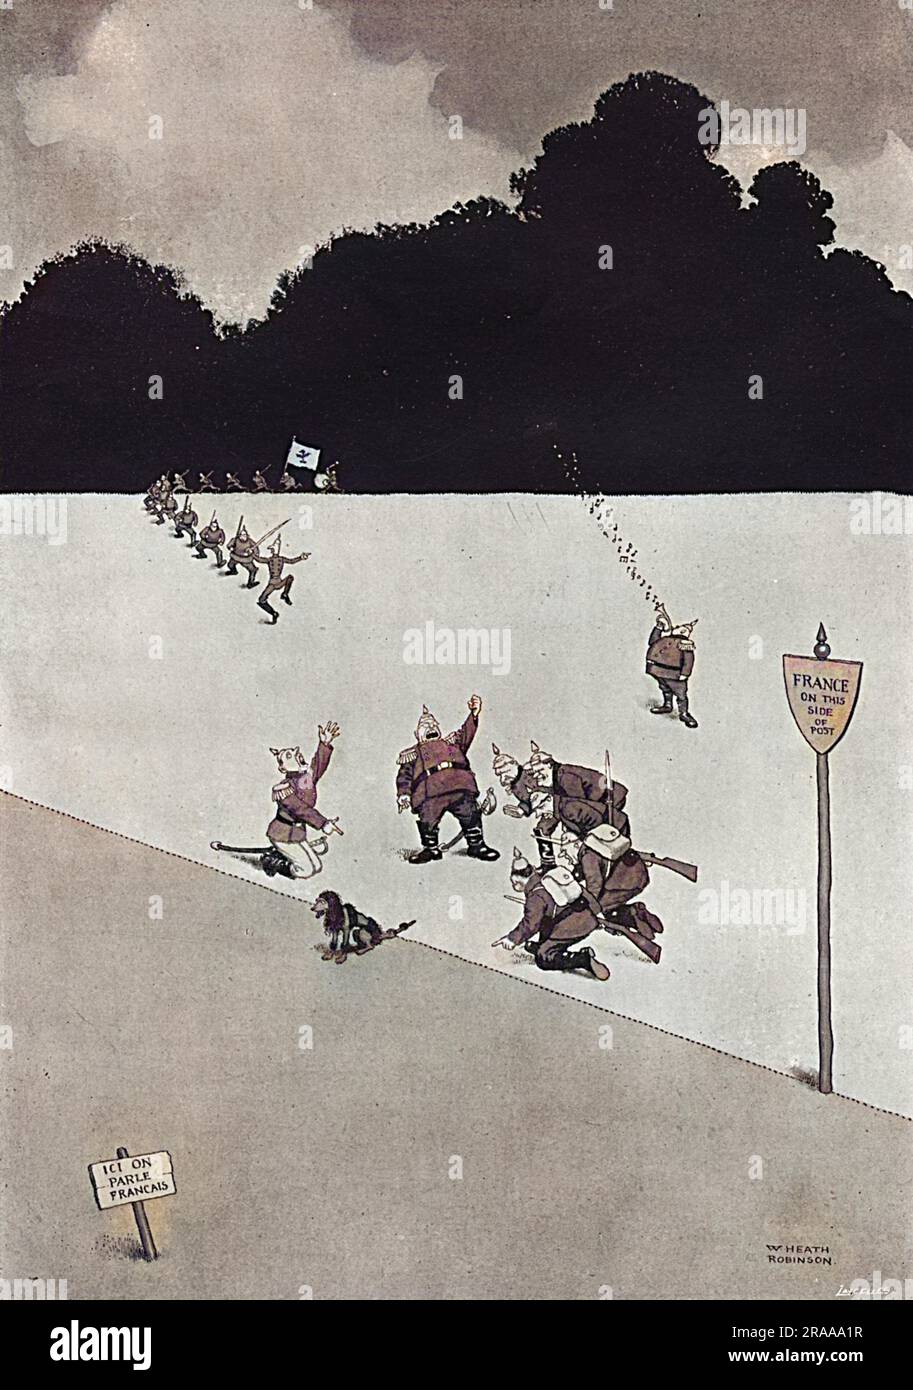 Heath Robinson gives his take on the cause of the First World War. A poodle's tail has strayed a few inches over the border, much to the dismay and rage of the German soldiers nearby.     Date: 1915 Stock Photo